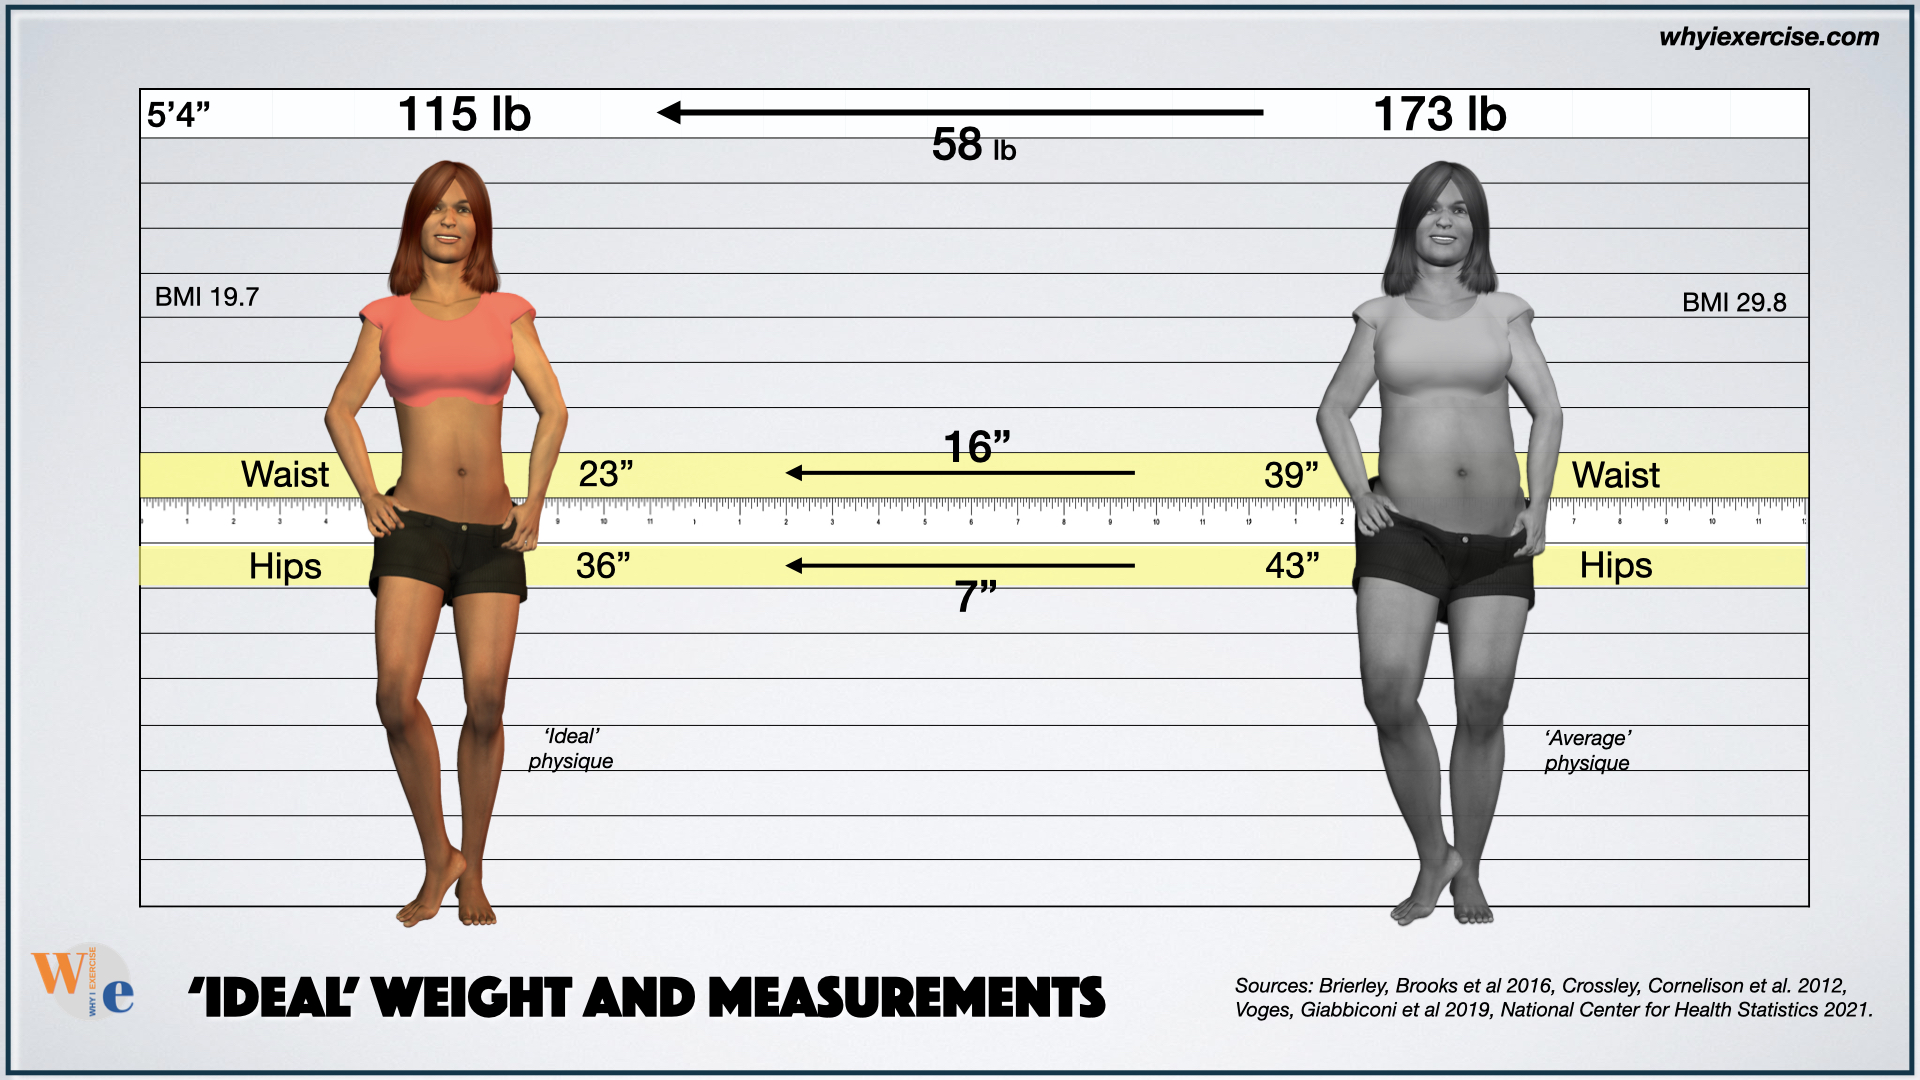 Are There Ideal Measurements for an Athletic Woman by Body Weight